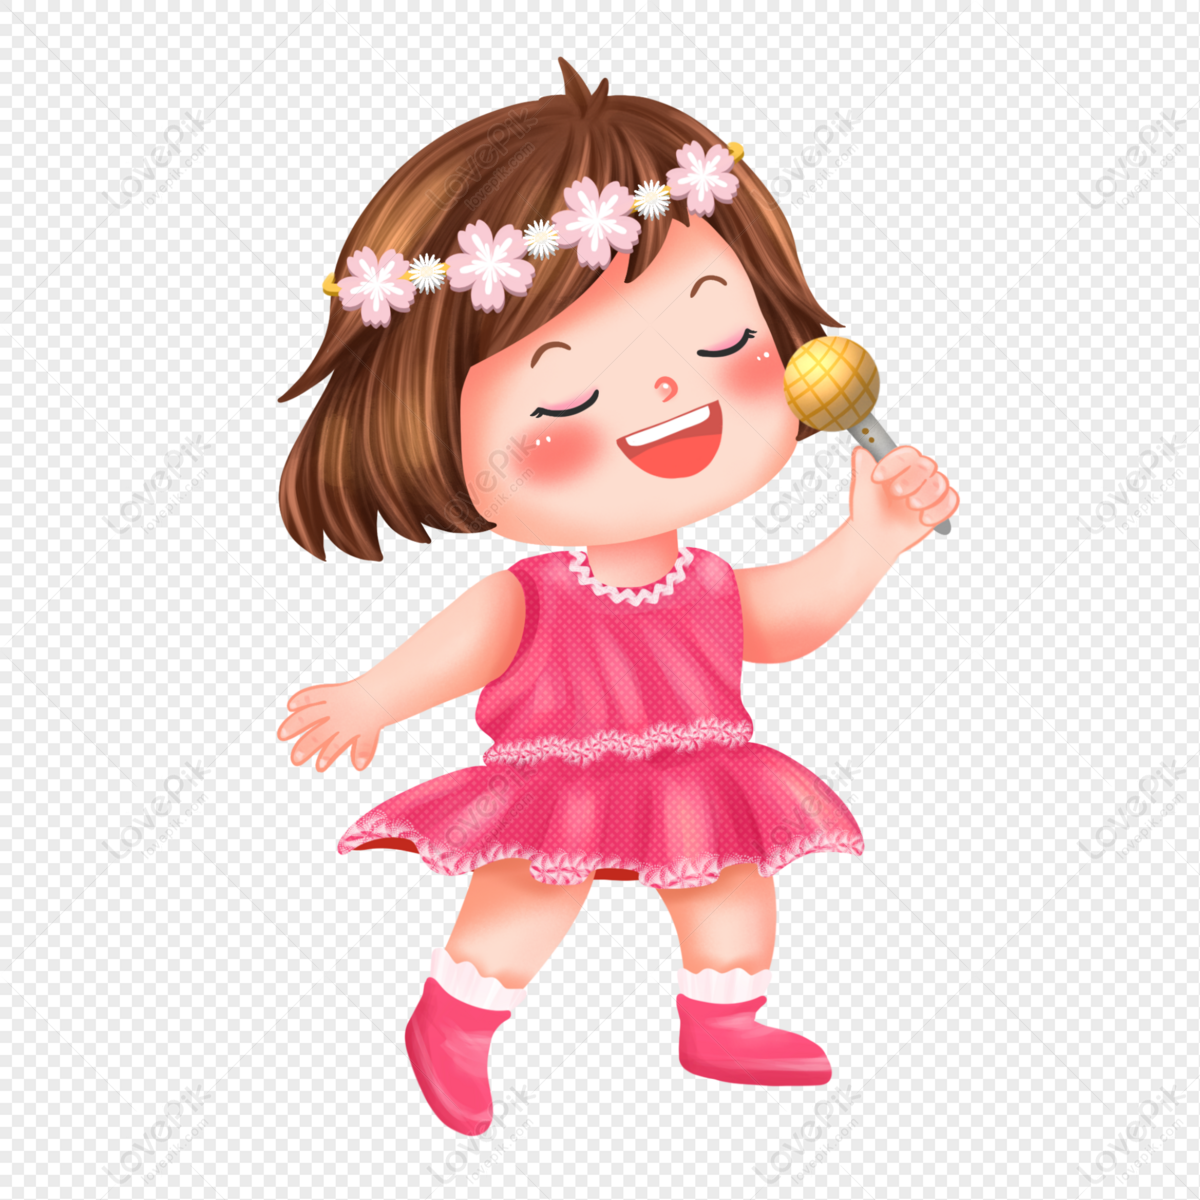 Girl Singing PNG Transparent Background And Clipart Image For Free Download  - Lovepik | 401735930